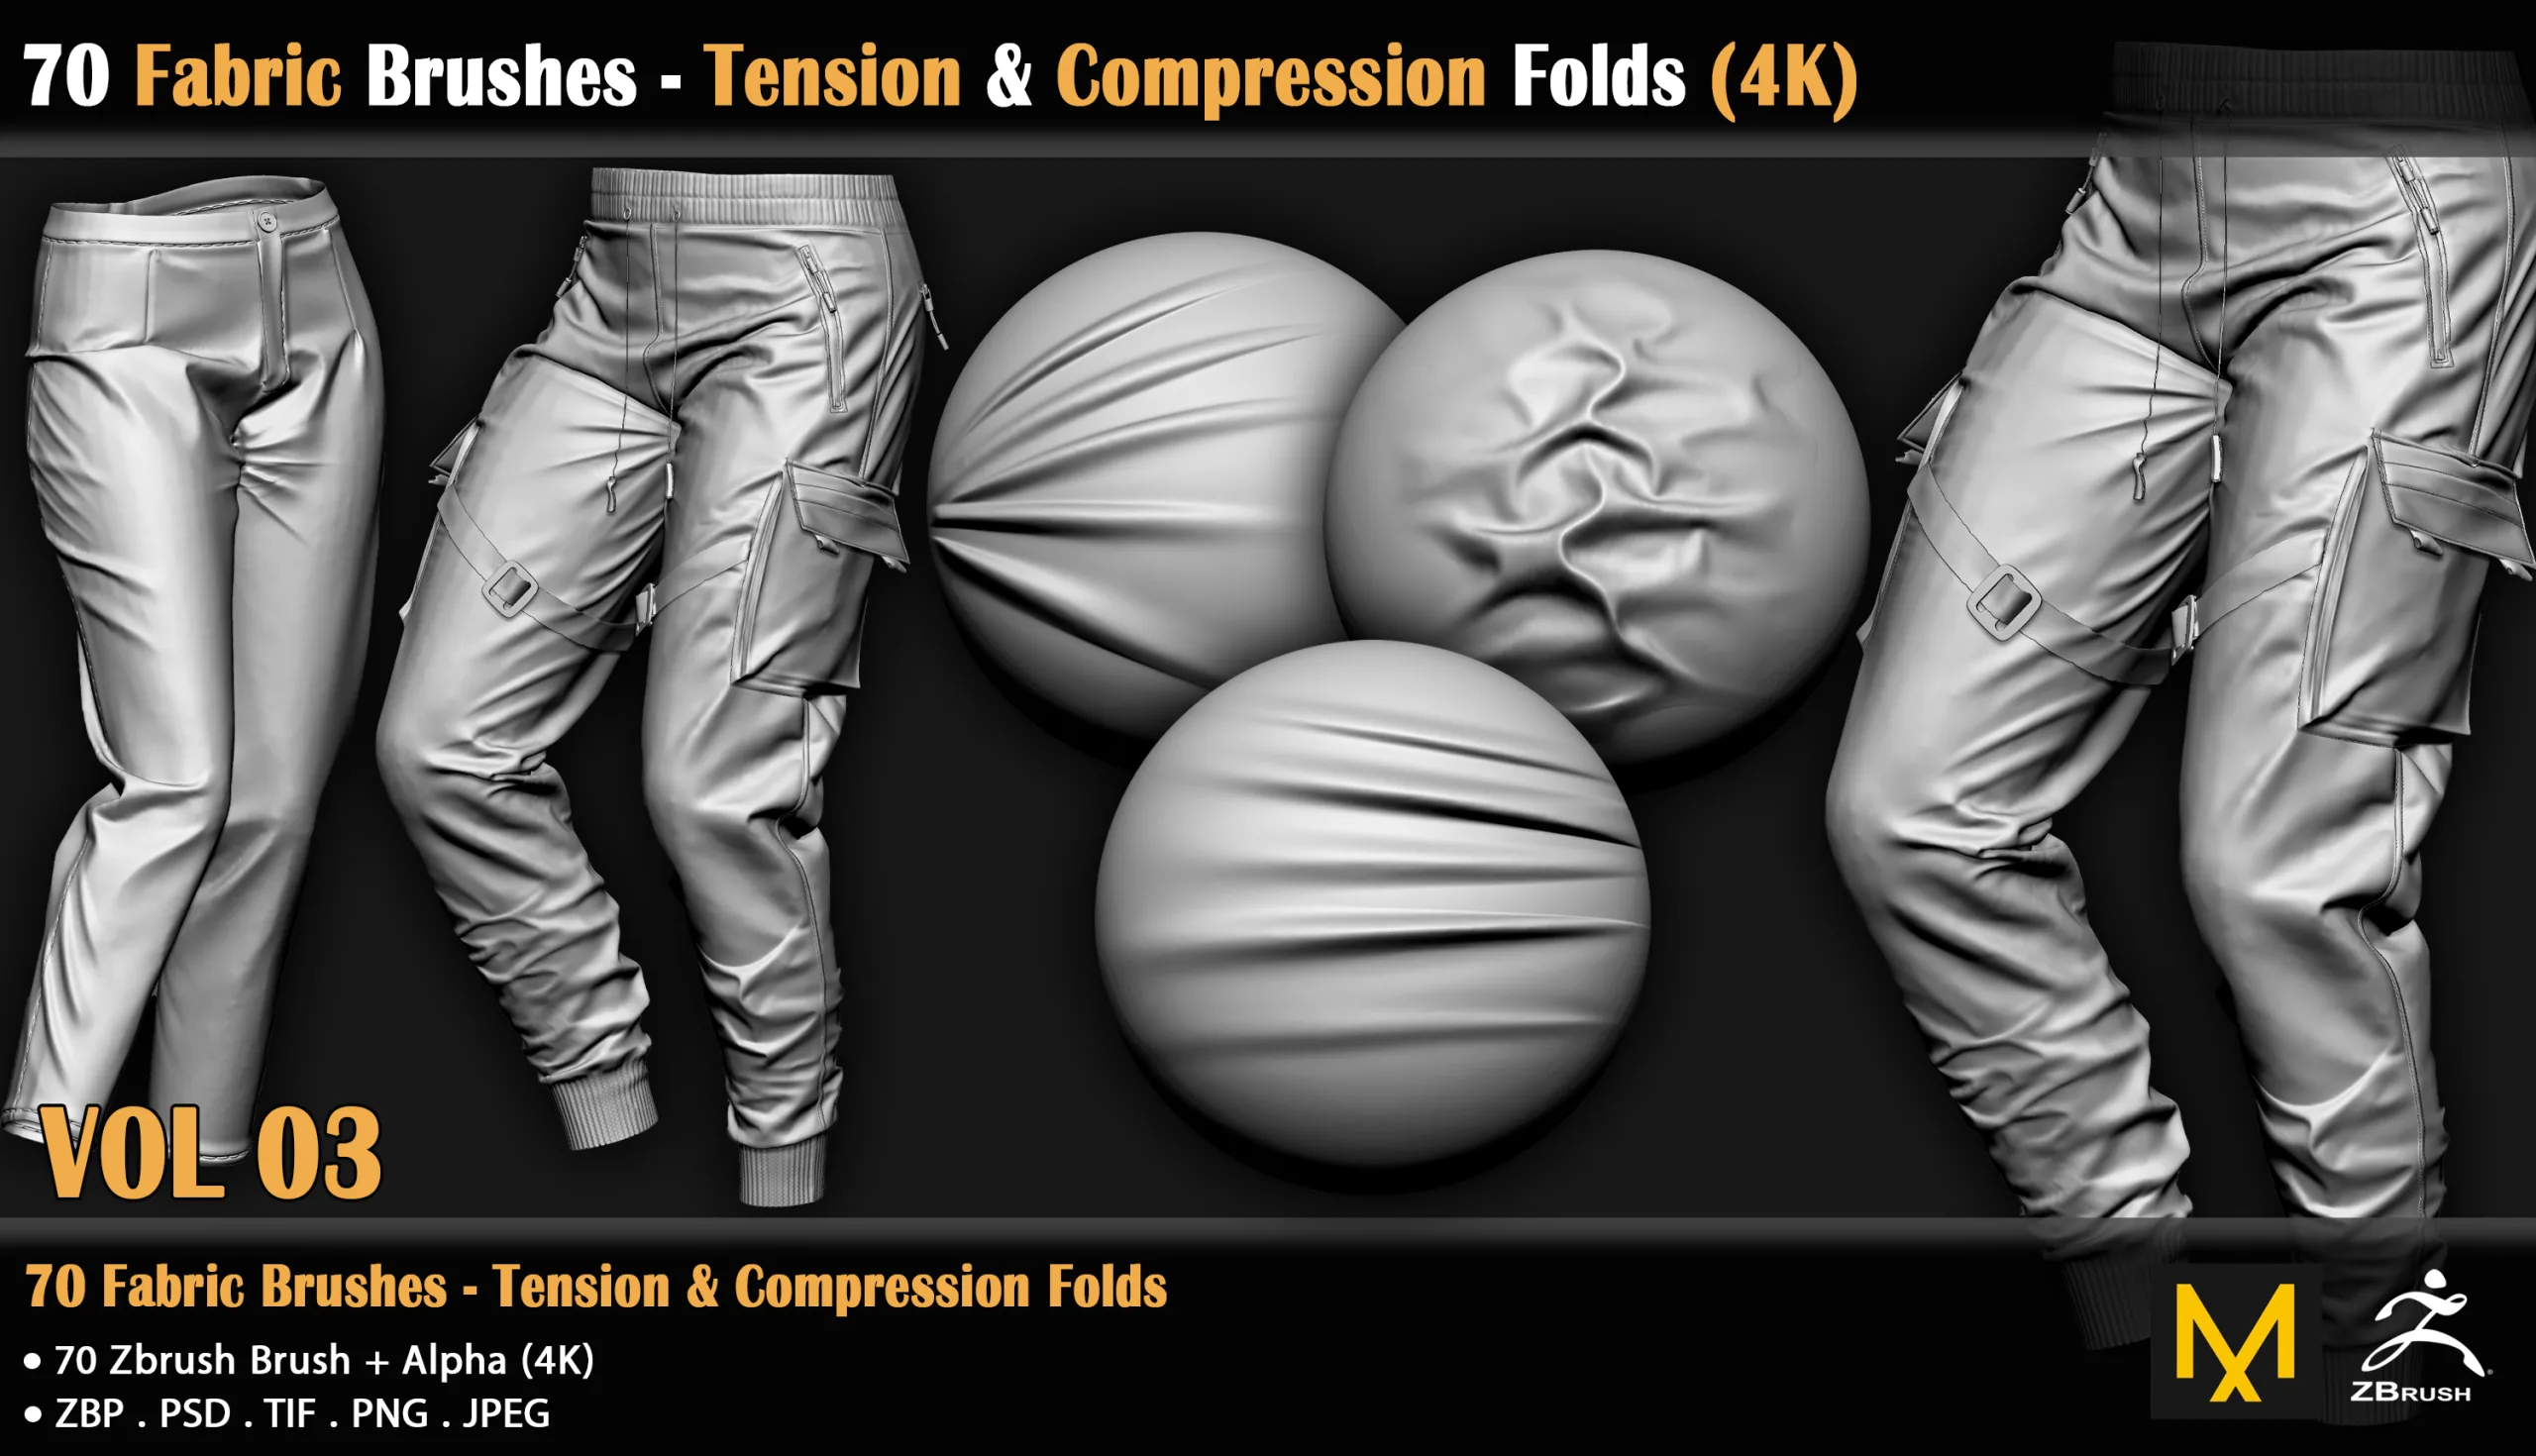 70 Fabric Brushes - Tension & Compression Folds - 4K (VOL 03)